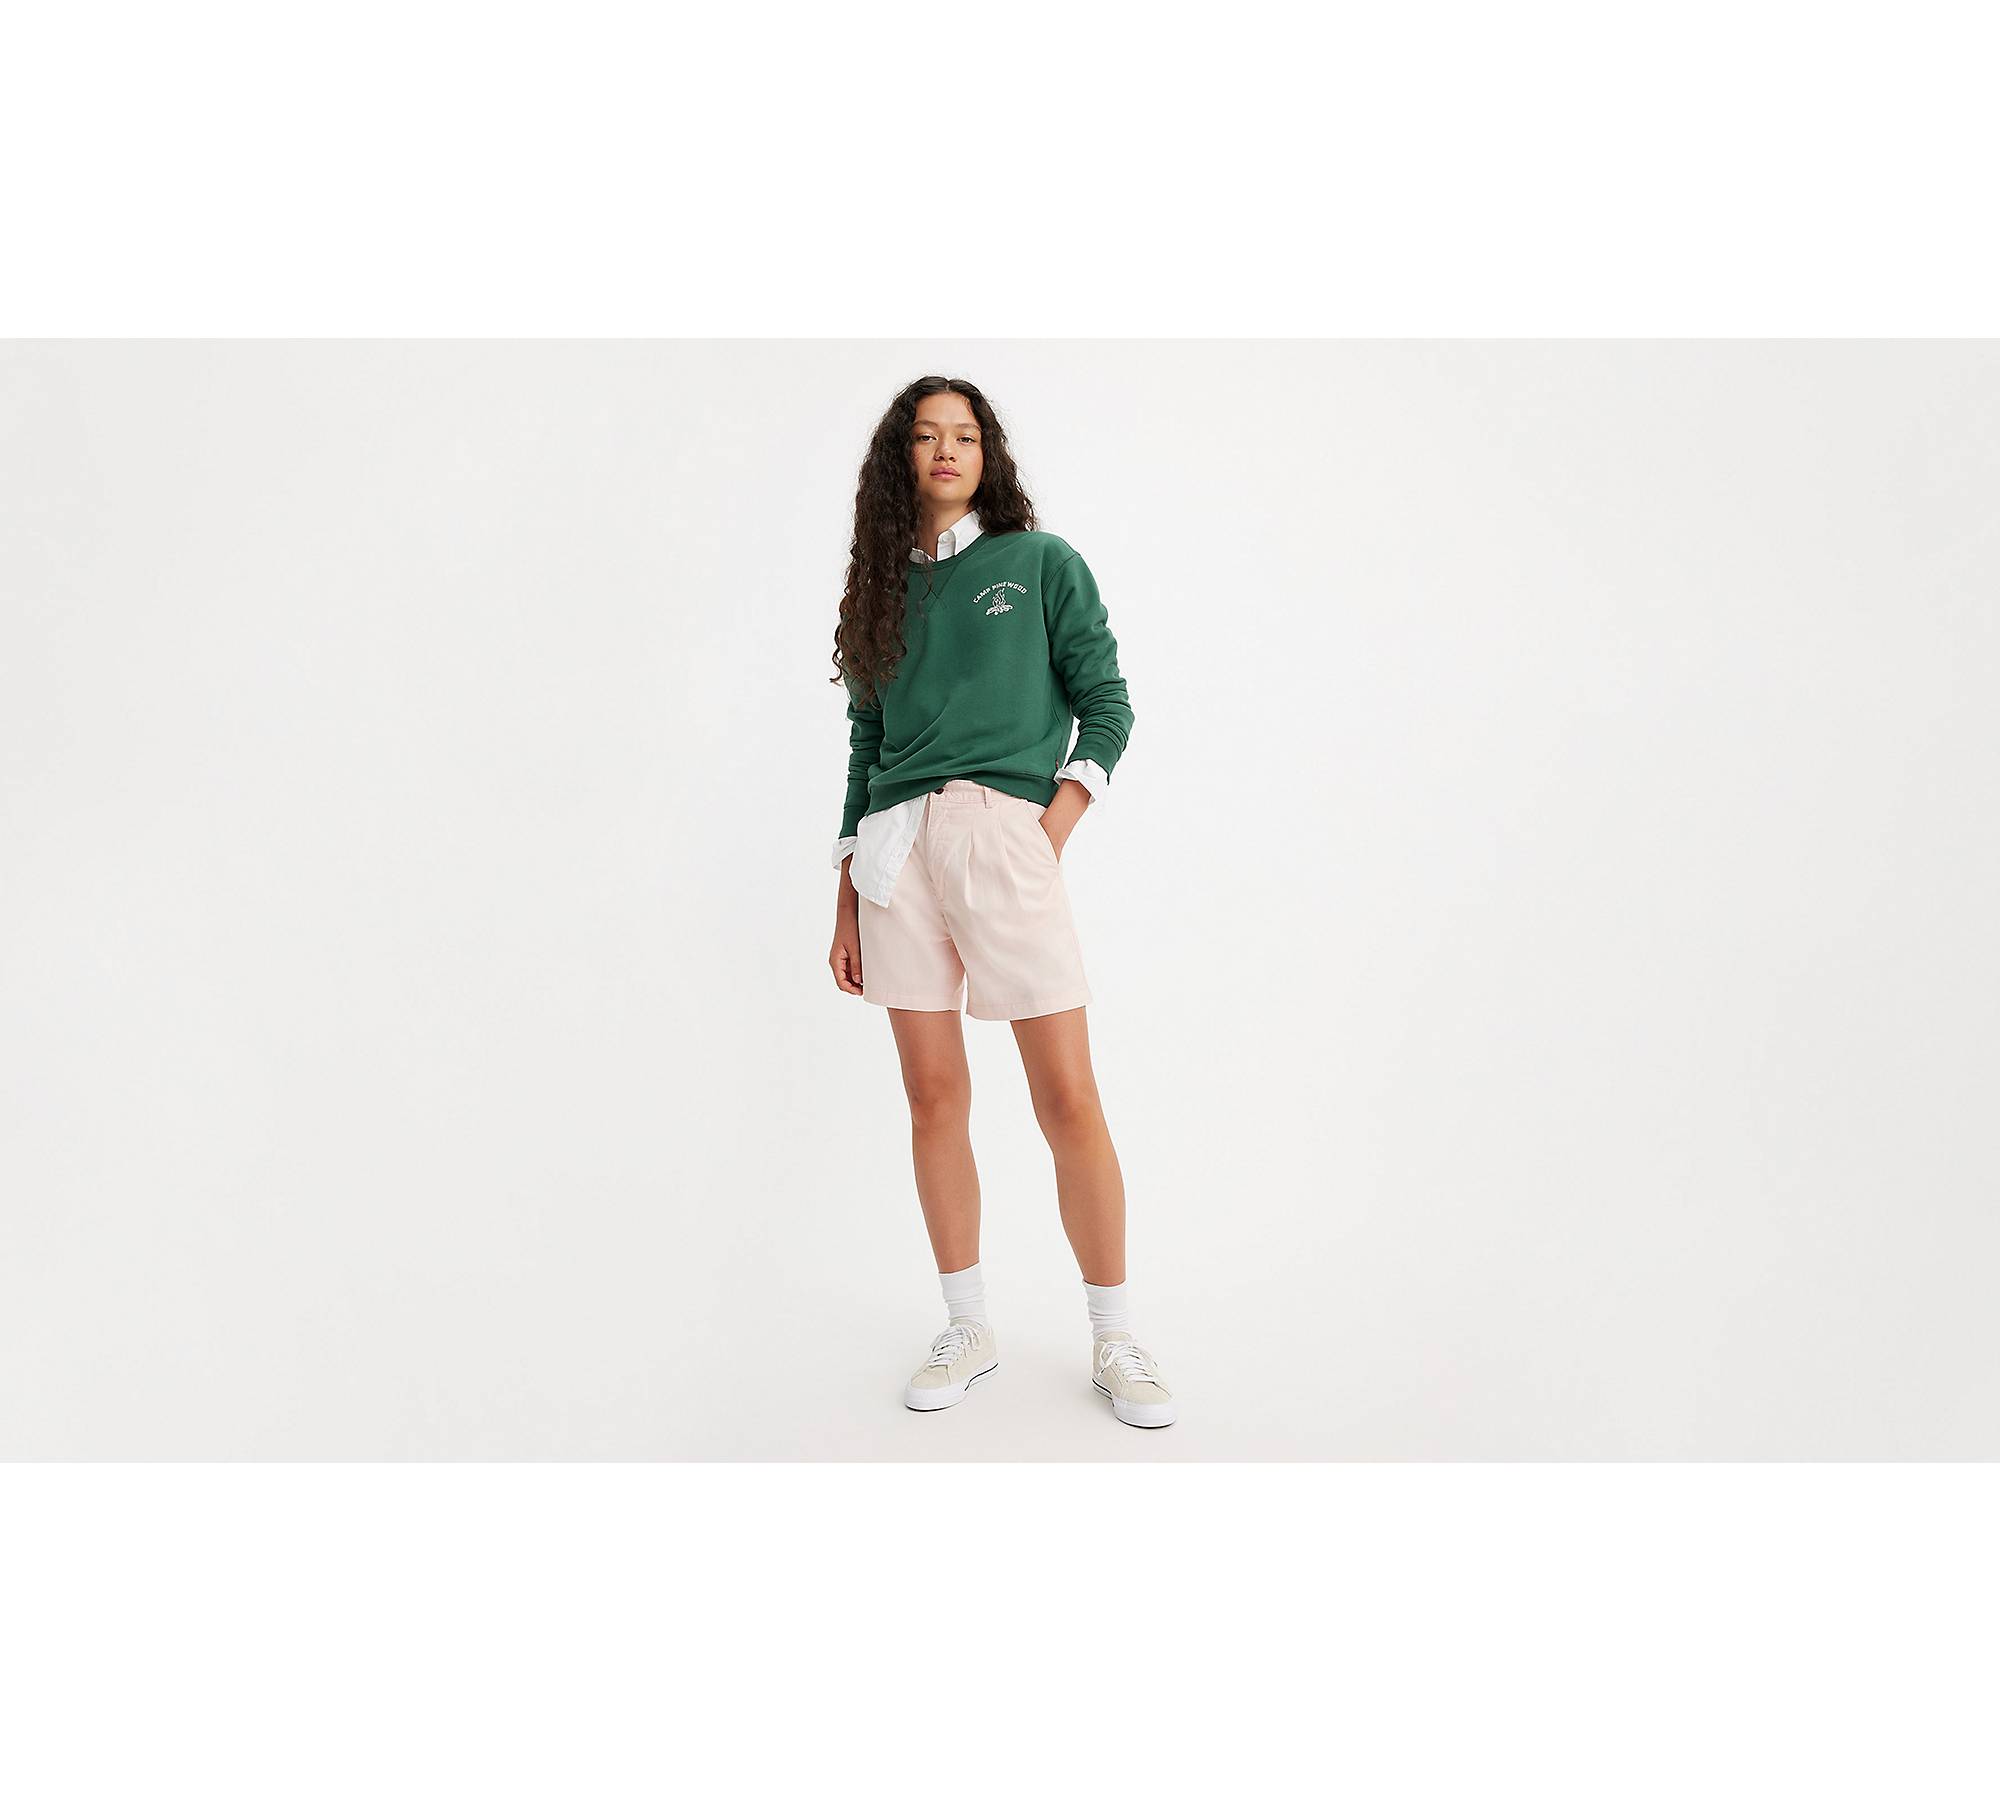 Pleated Women's Trouser Shorts - Pink | Levi's® US